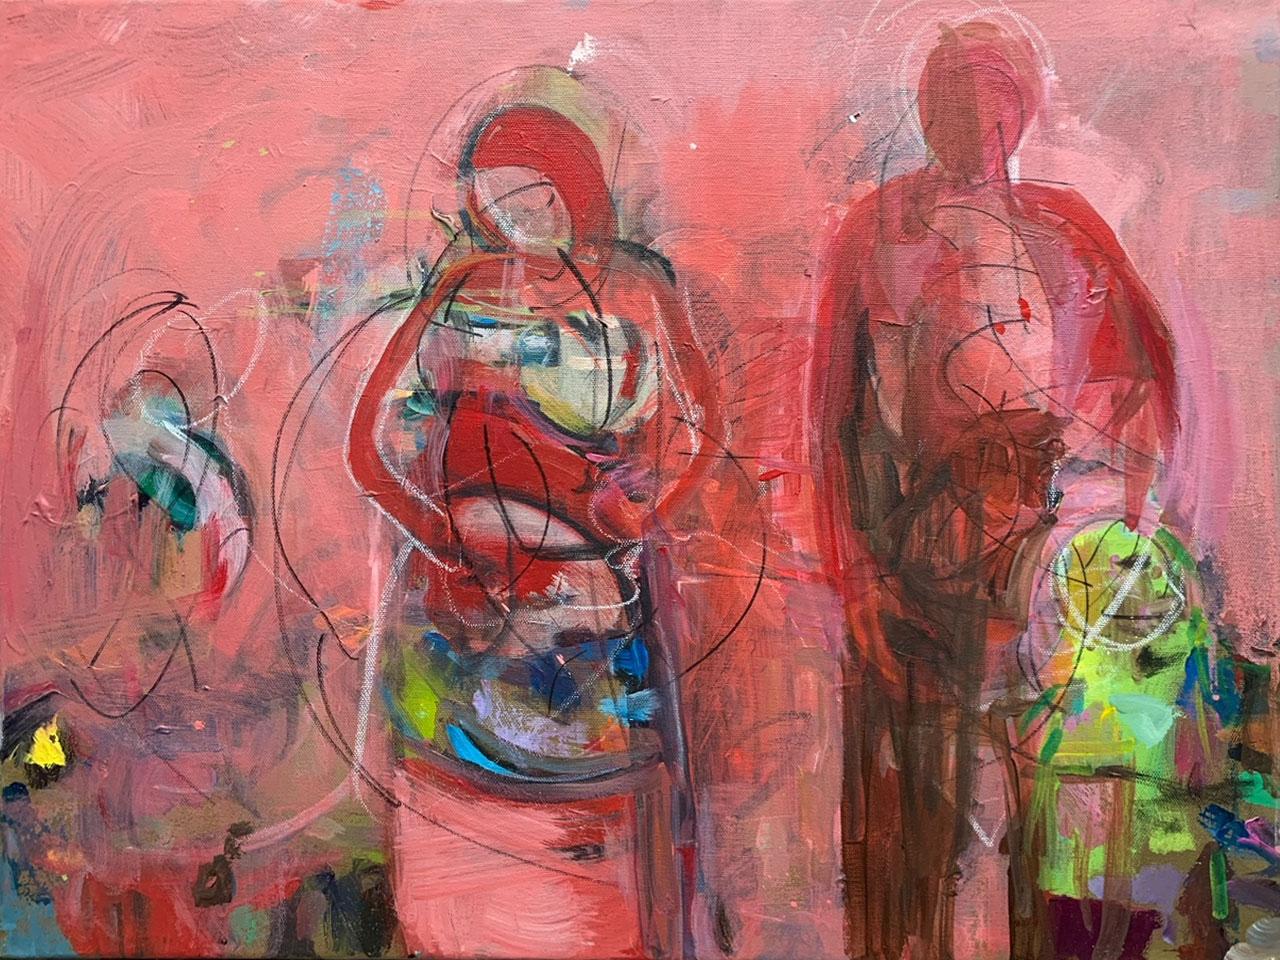 Frank Shifreen
Family 2
2021
18 x 24 inches 
Acrylic on Canvas
Signed, titled and dated on verso

These new works start from polar opposite impulses which juxtapose the purity and beauty of platonic forms opposed to impulsive muscular instantaneous